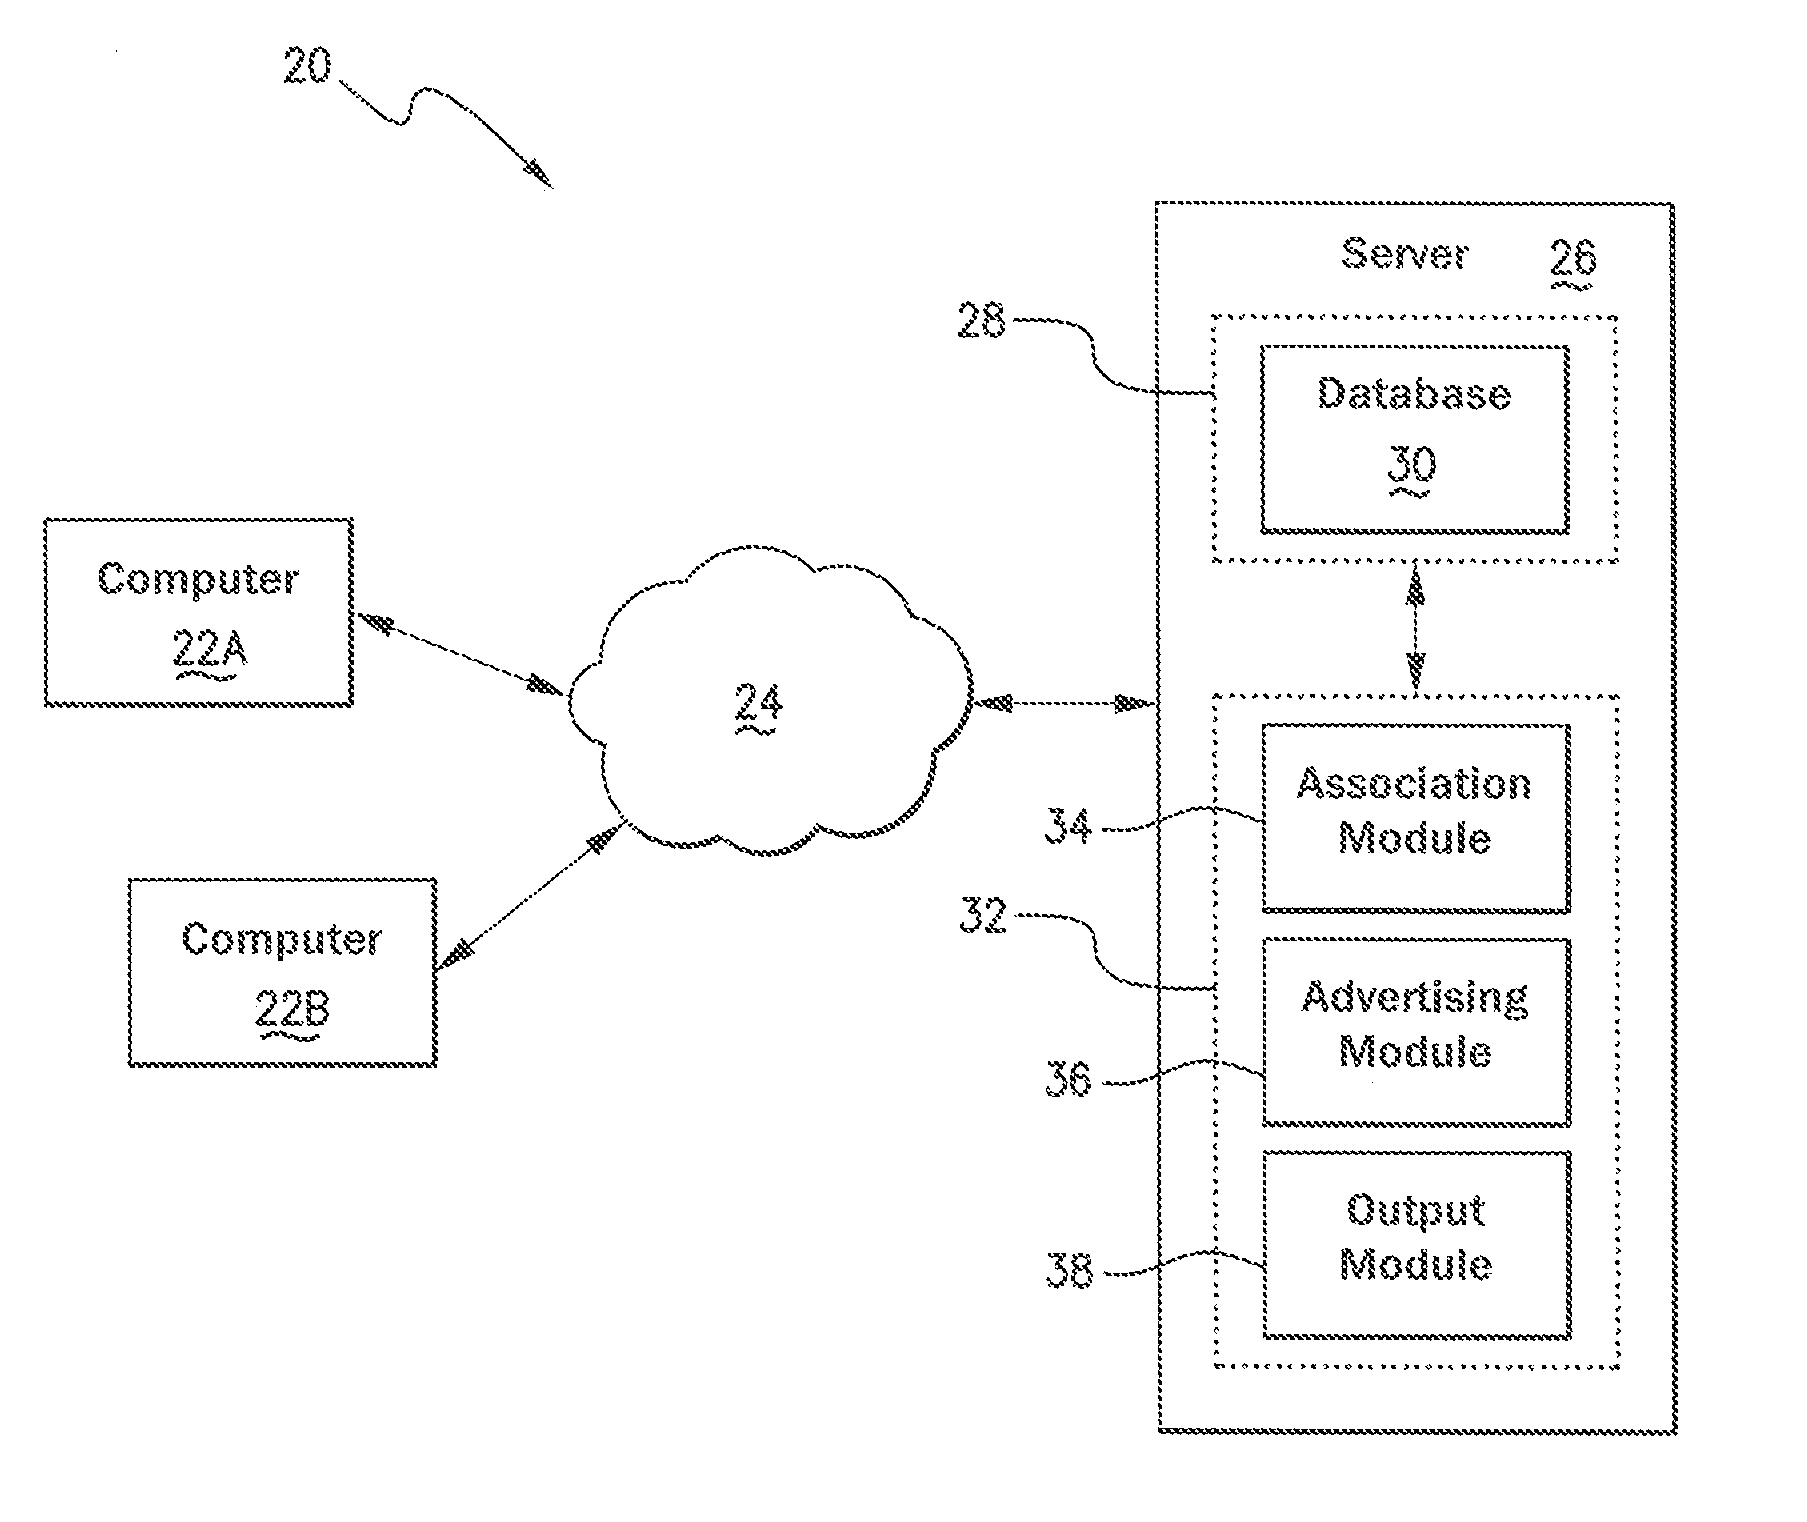 Method and system for providing advertising in a virtual environment